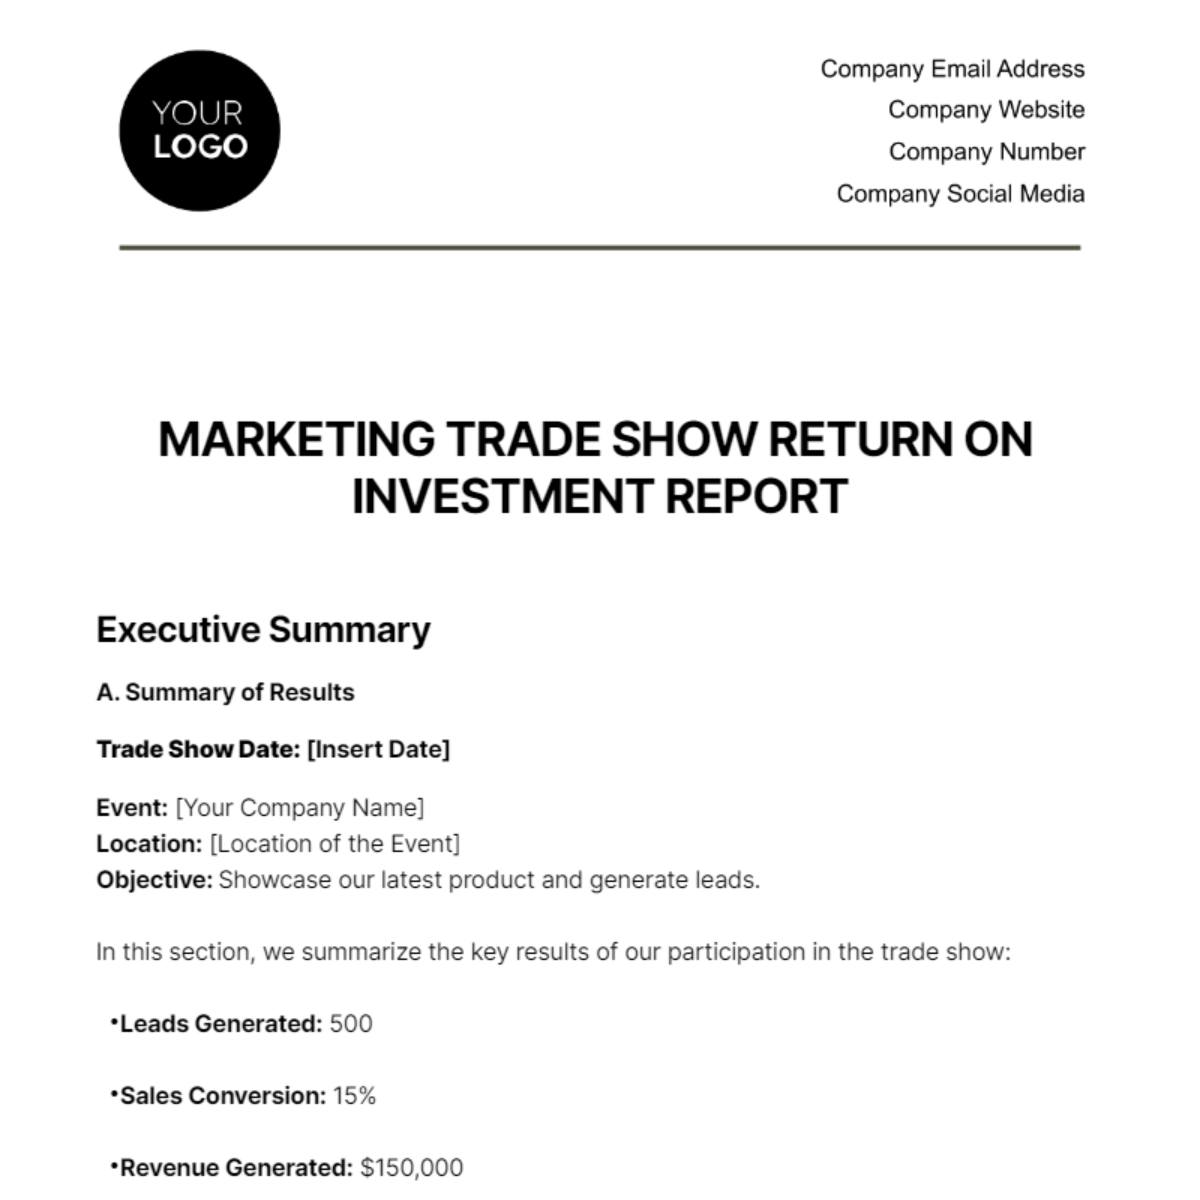 Marketing Trade Show Return on Investment Report Template